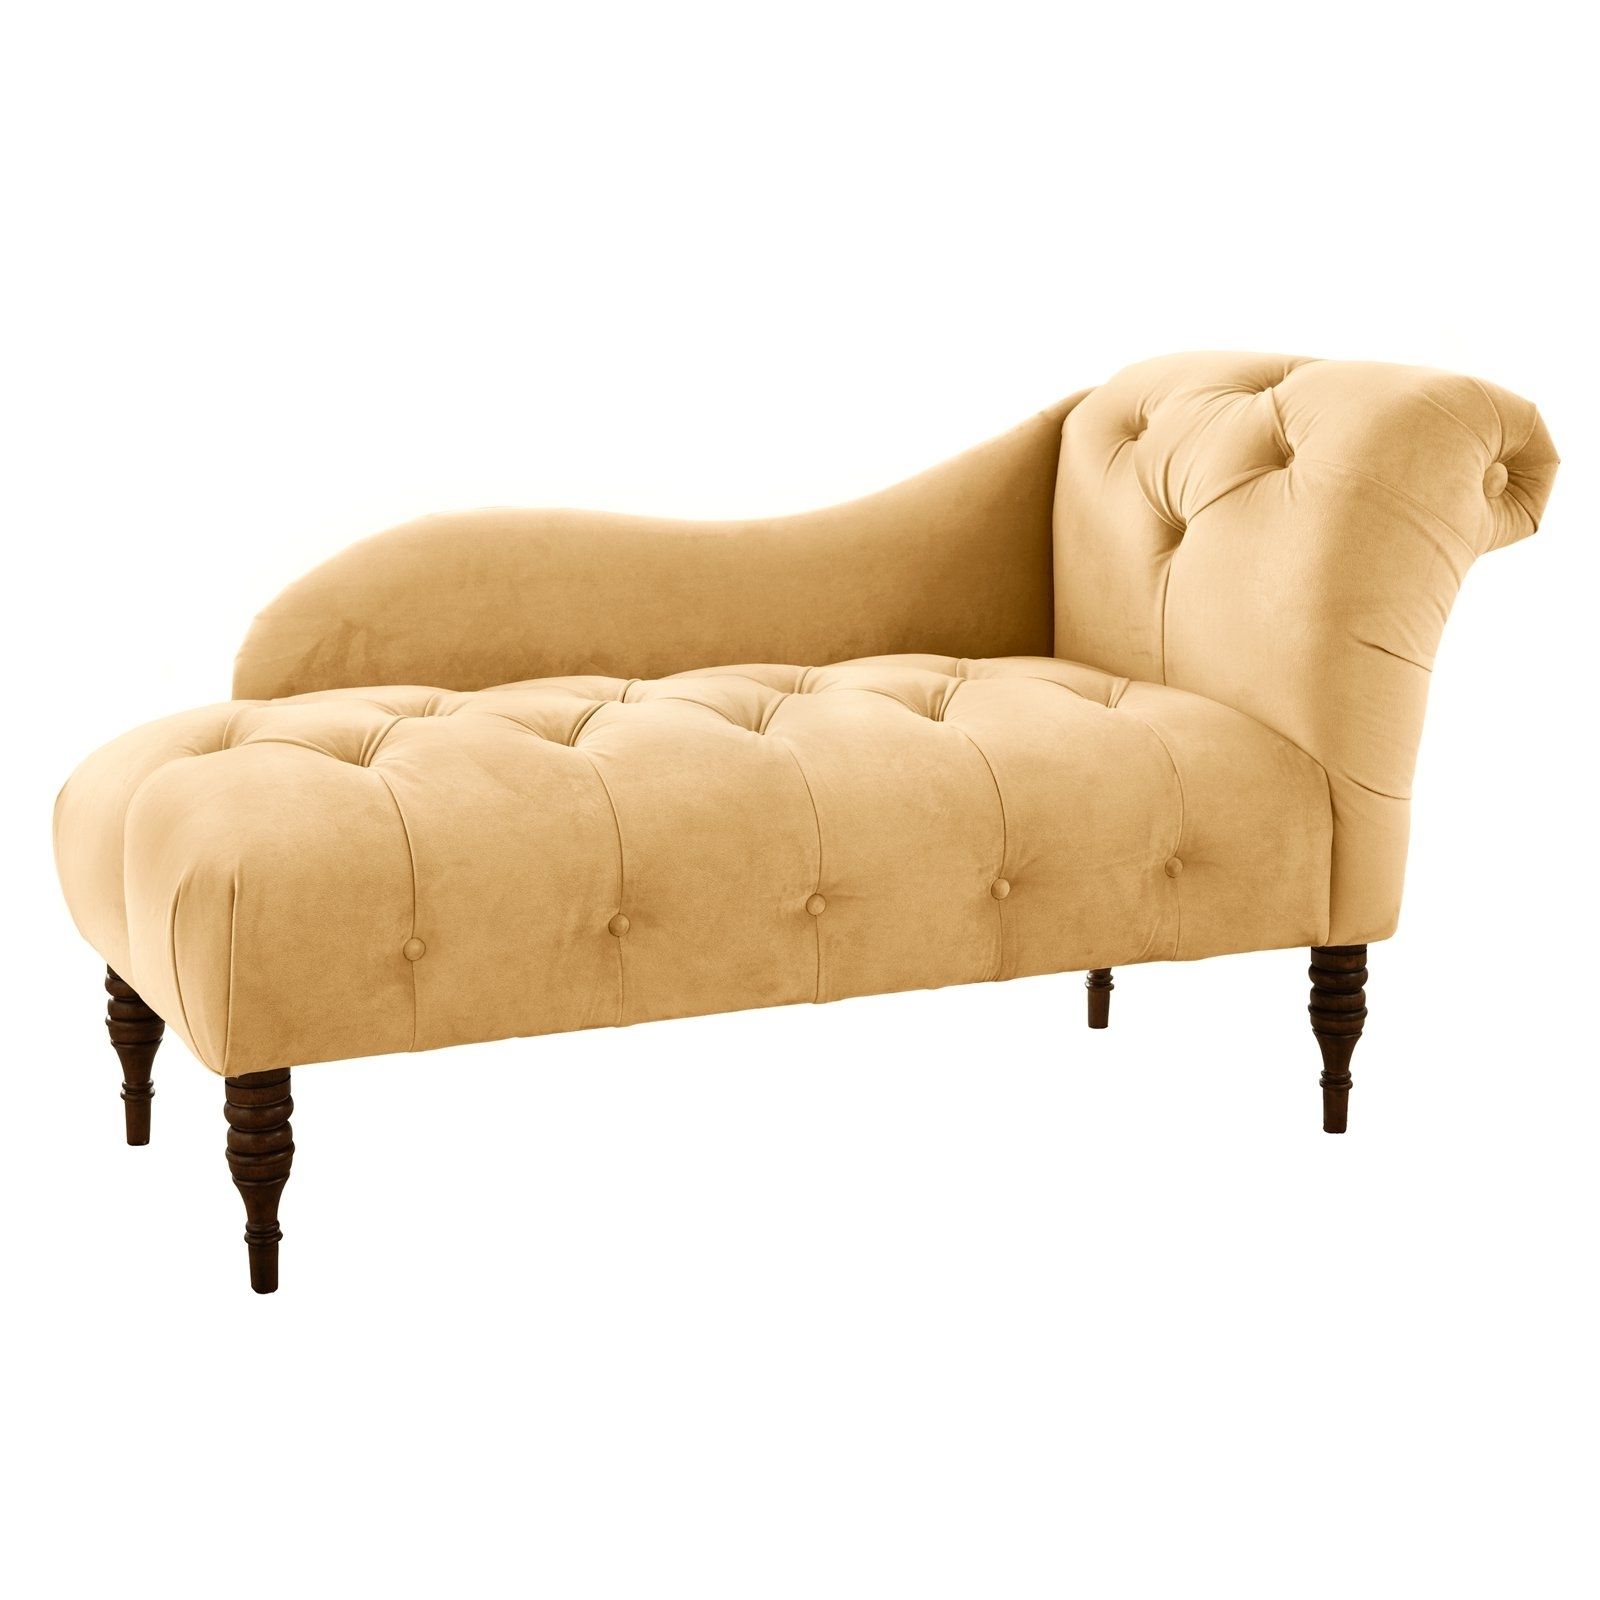 Hayneedle Intended For Most Current Upholstered Chaise Lounges (View 9 of 15)